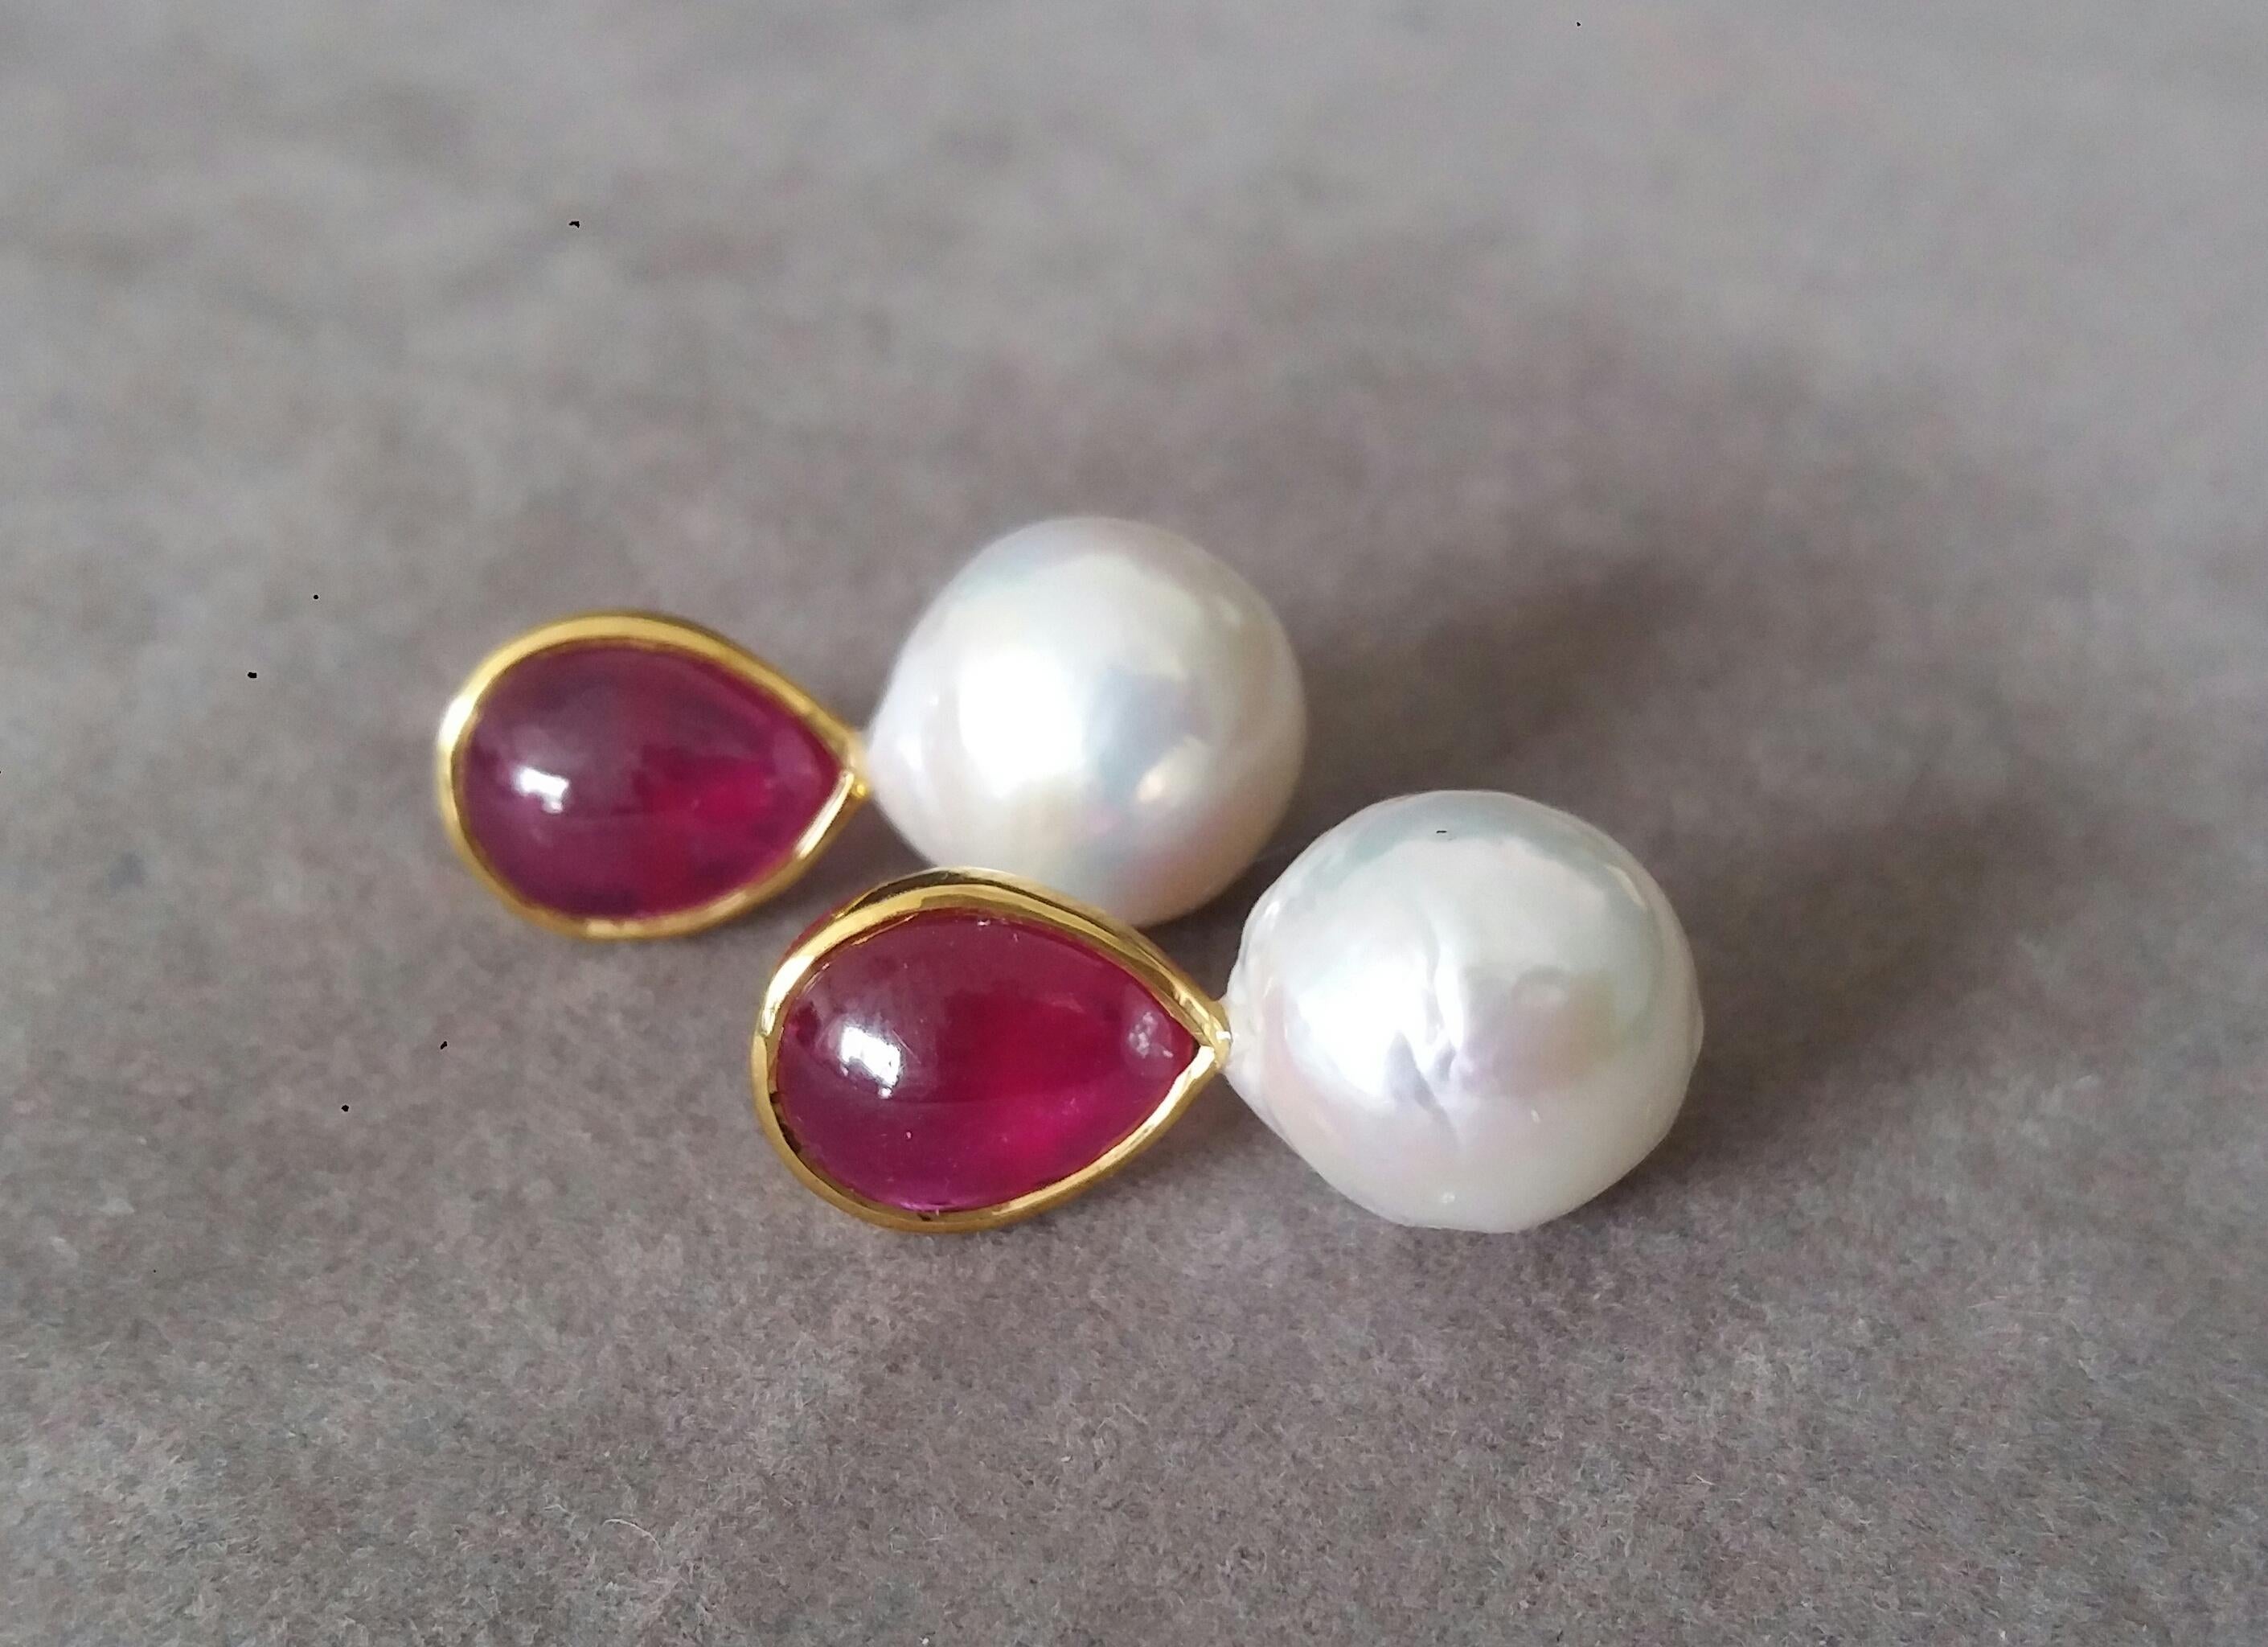 White Baroque Pearls Pear Shape Ruby Cabs 14 Kt Yellow Gold Bezel Stud Earrings For Sale 1